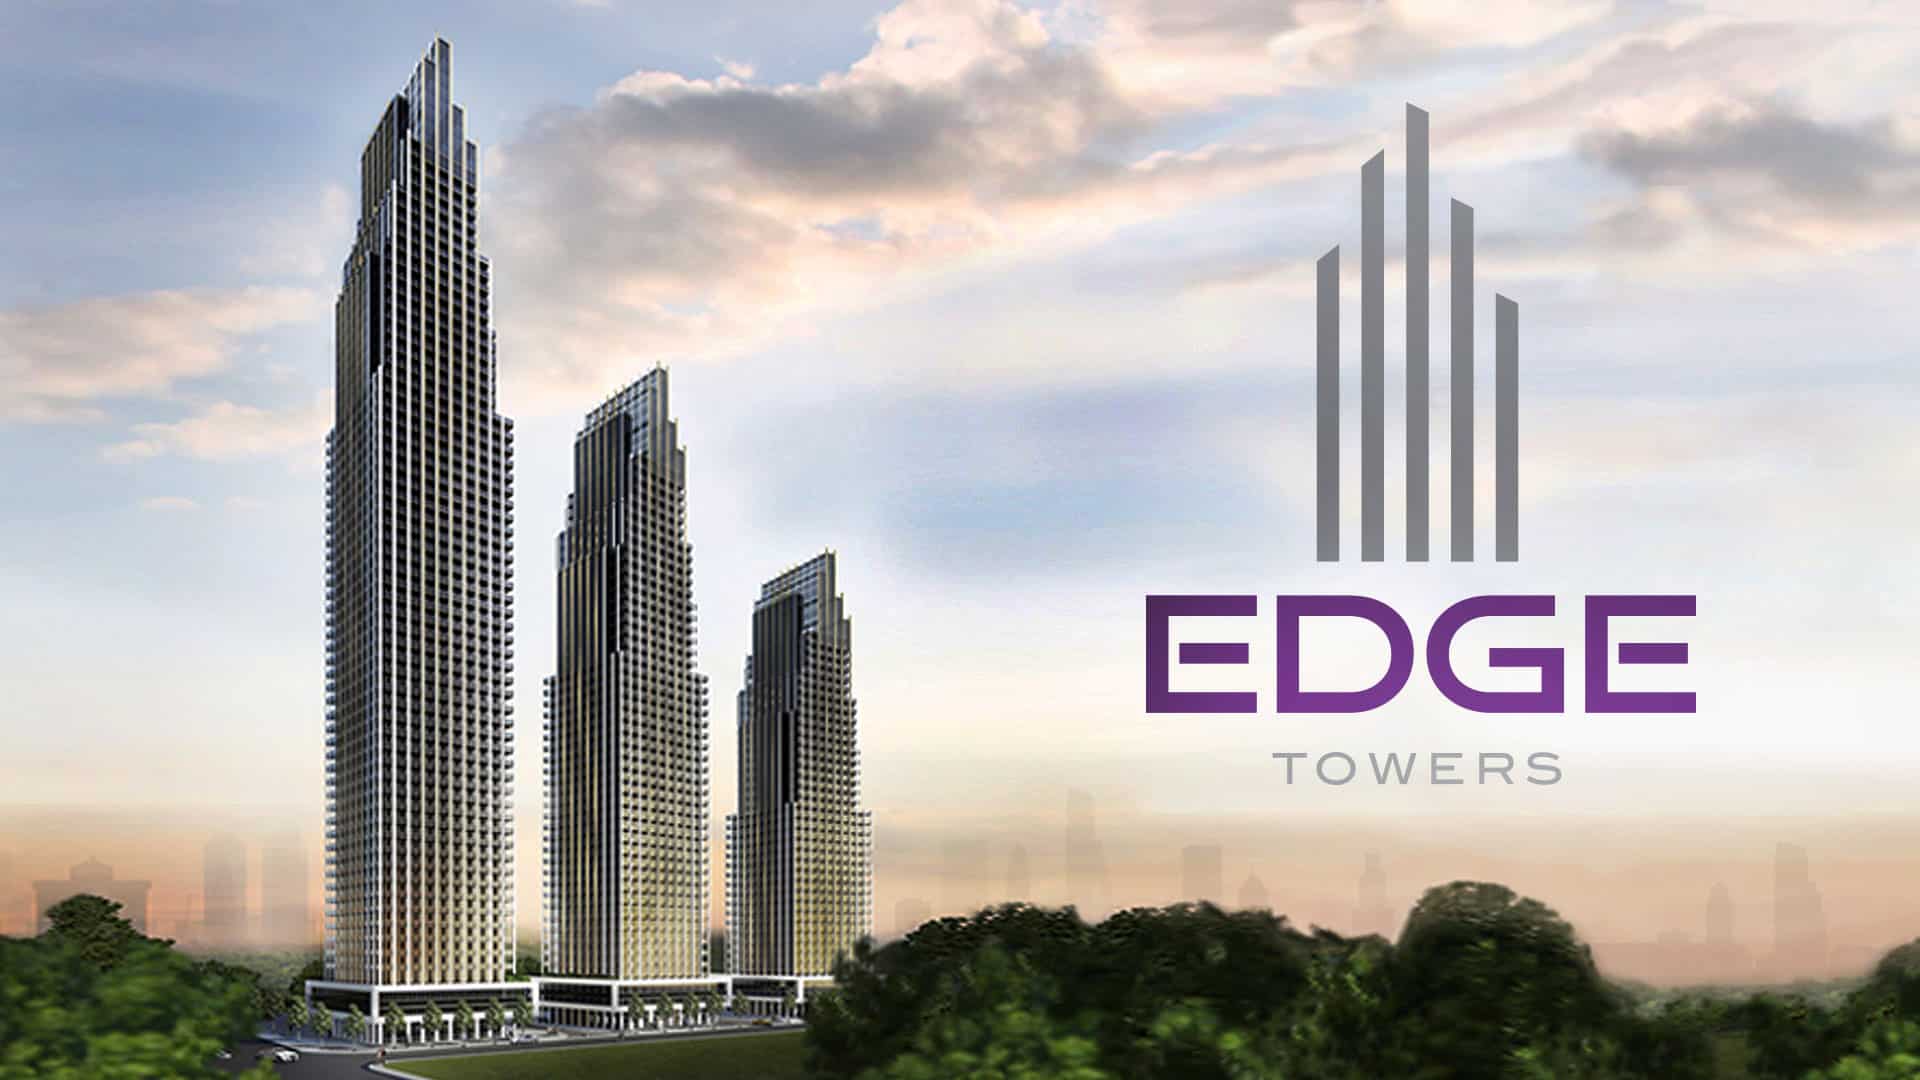 3 Condo Projects Coming Up In Mississauga In 2017 3 Condo Projects Coming Up In Mississauga In 2017 edge condos mississauga solmar condos elm dr mississauga edge towers mississauga squareonelife